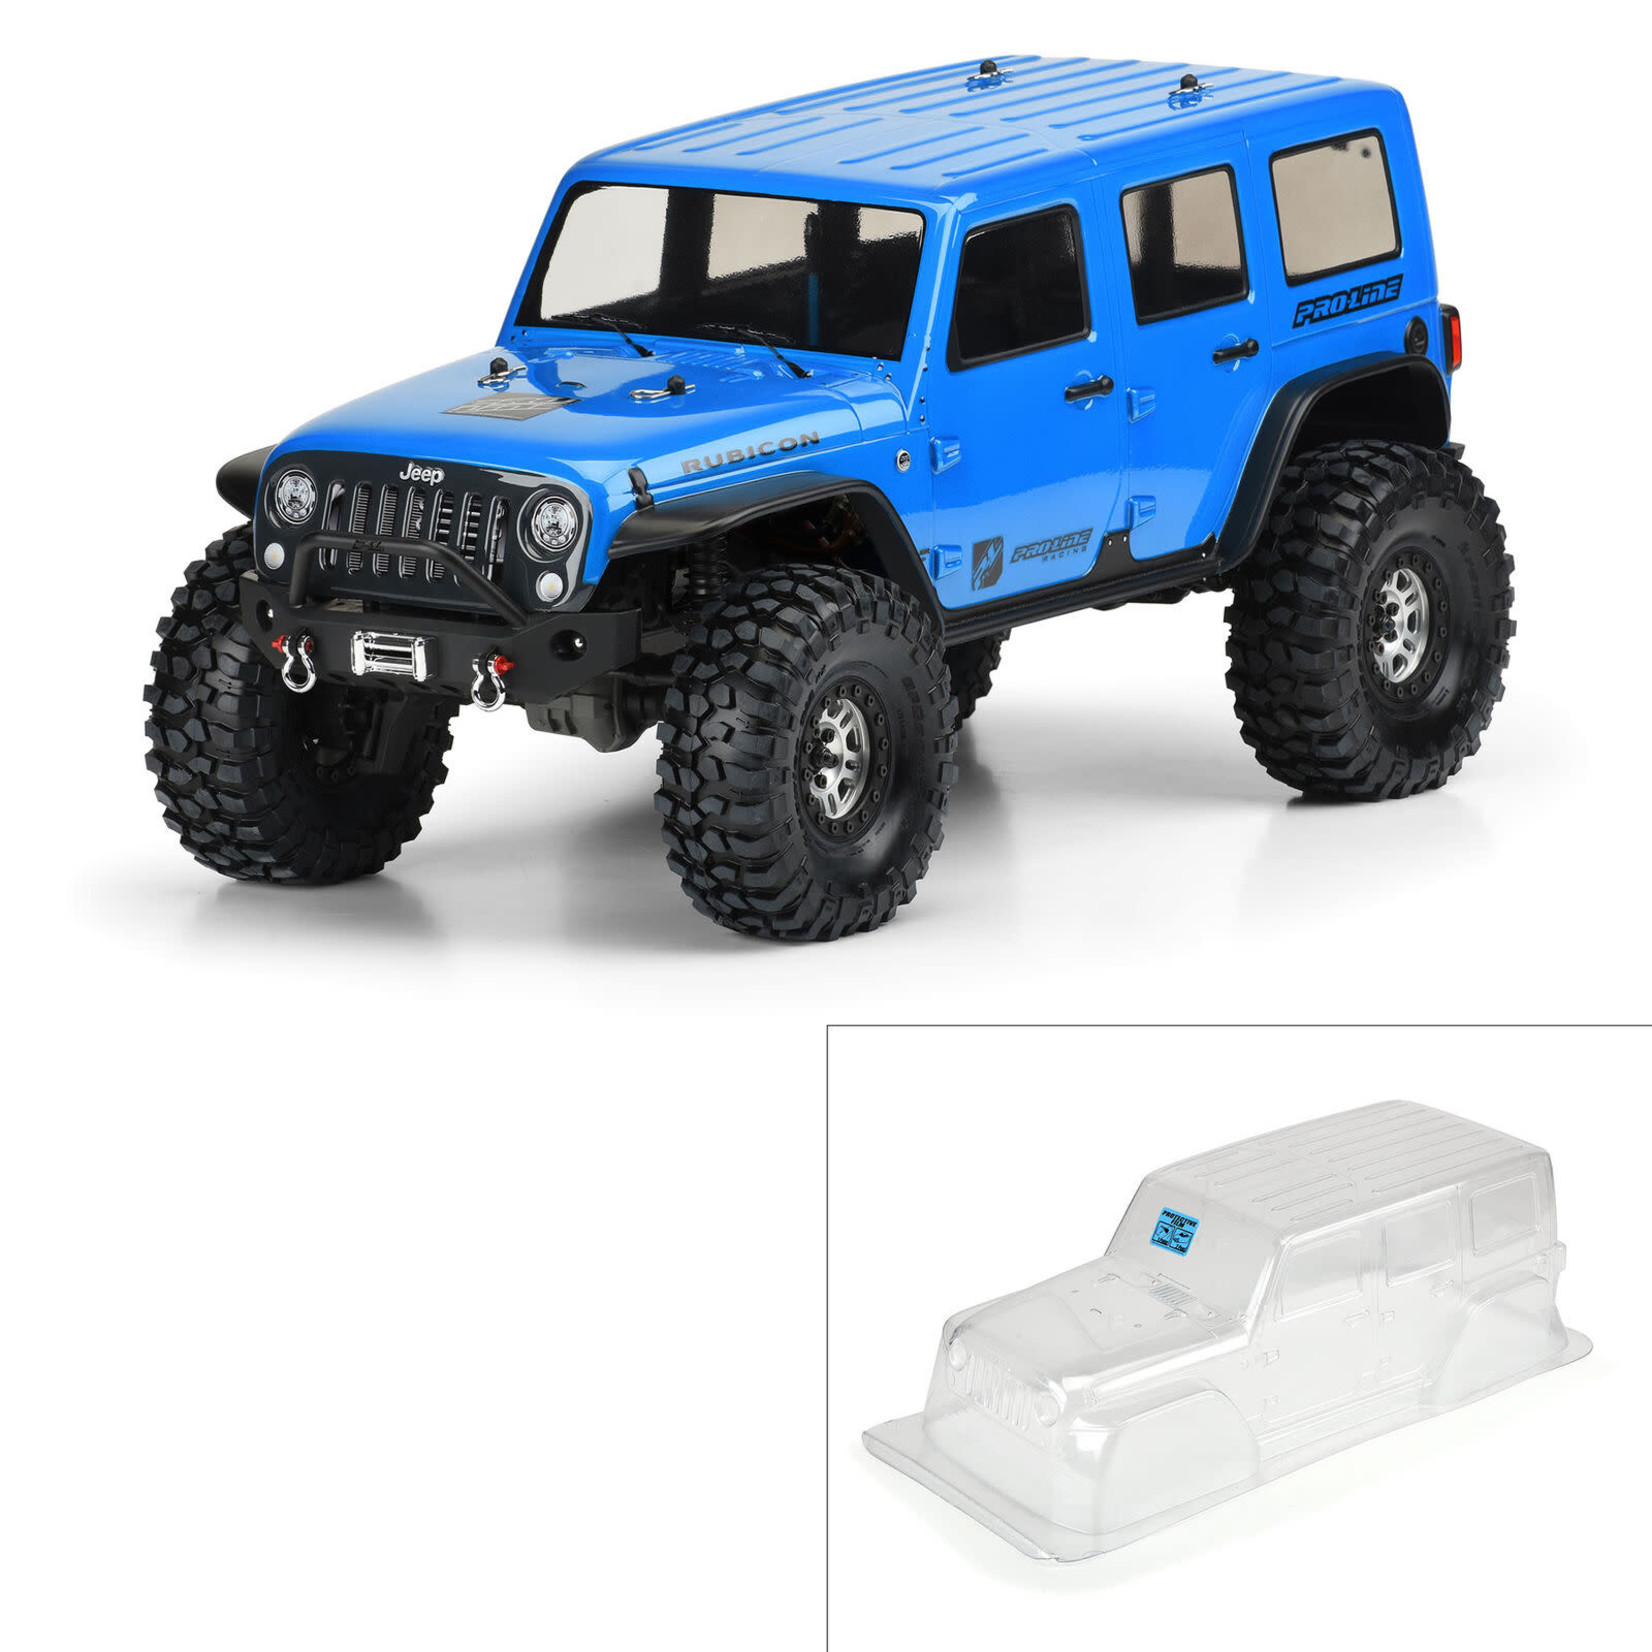 Pro-line Racing PRO350200 Pro-Line Jeep Wrangler Unlimited Rubicon Clear Body 12.8" WB TRX-4